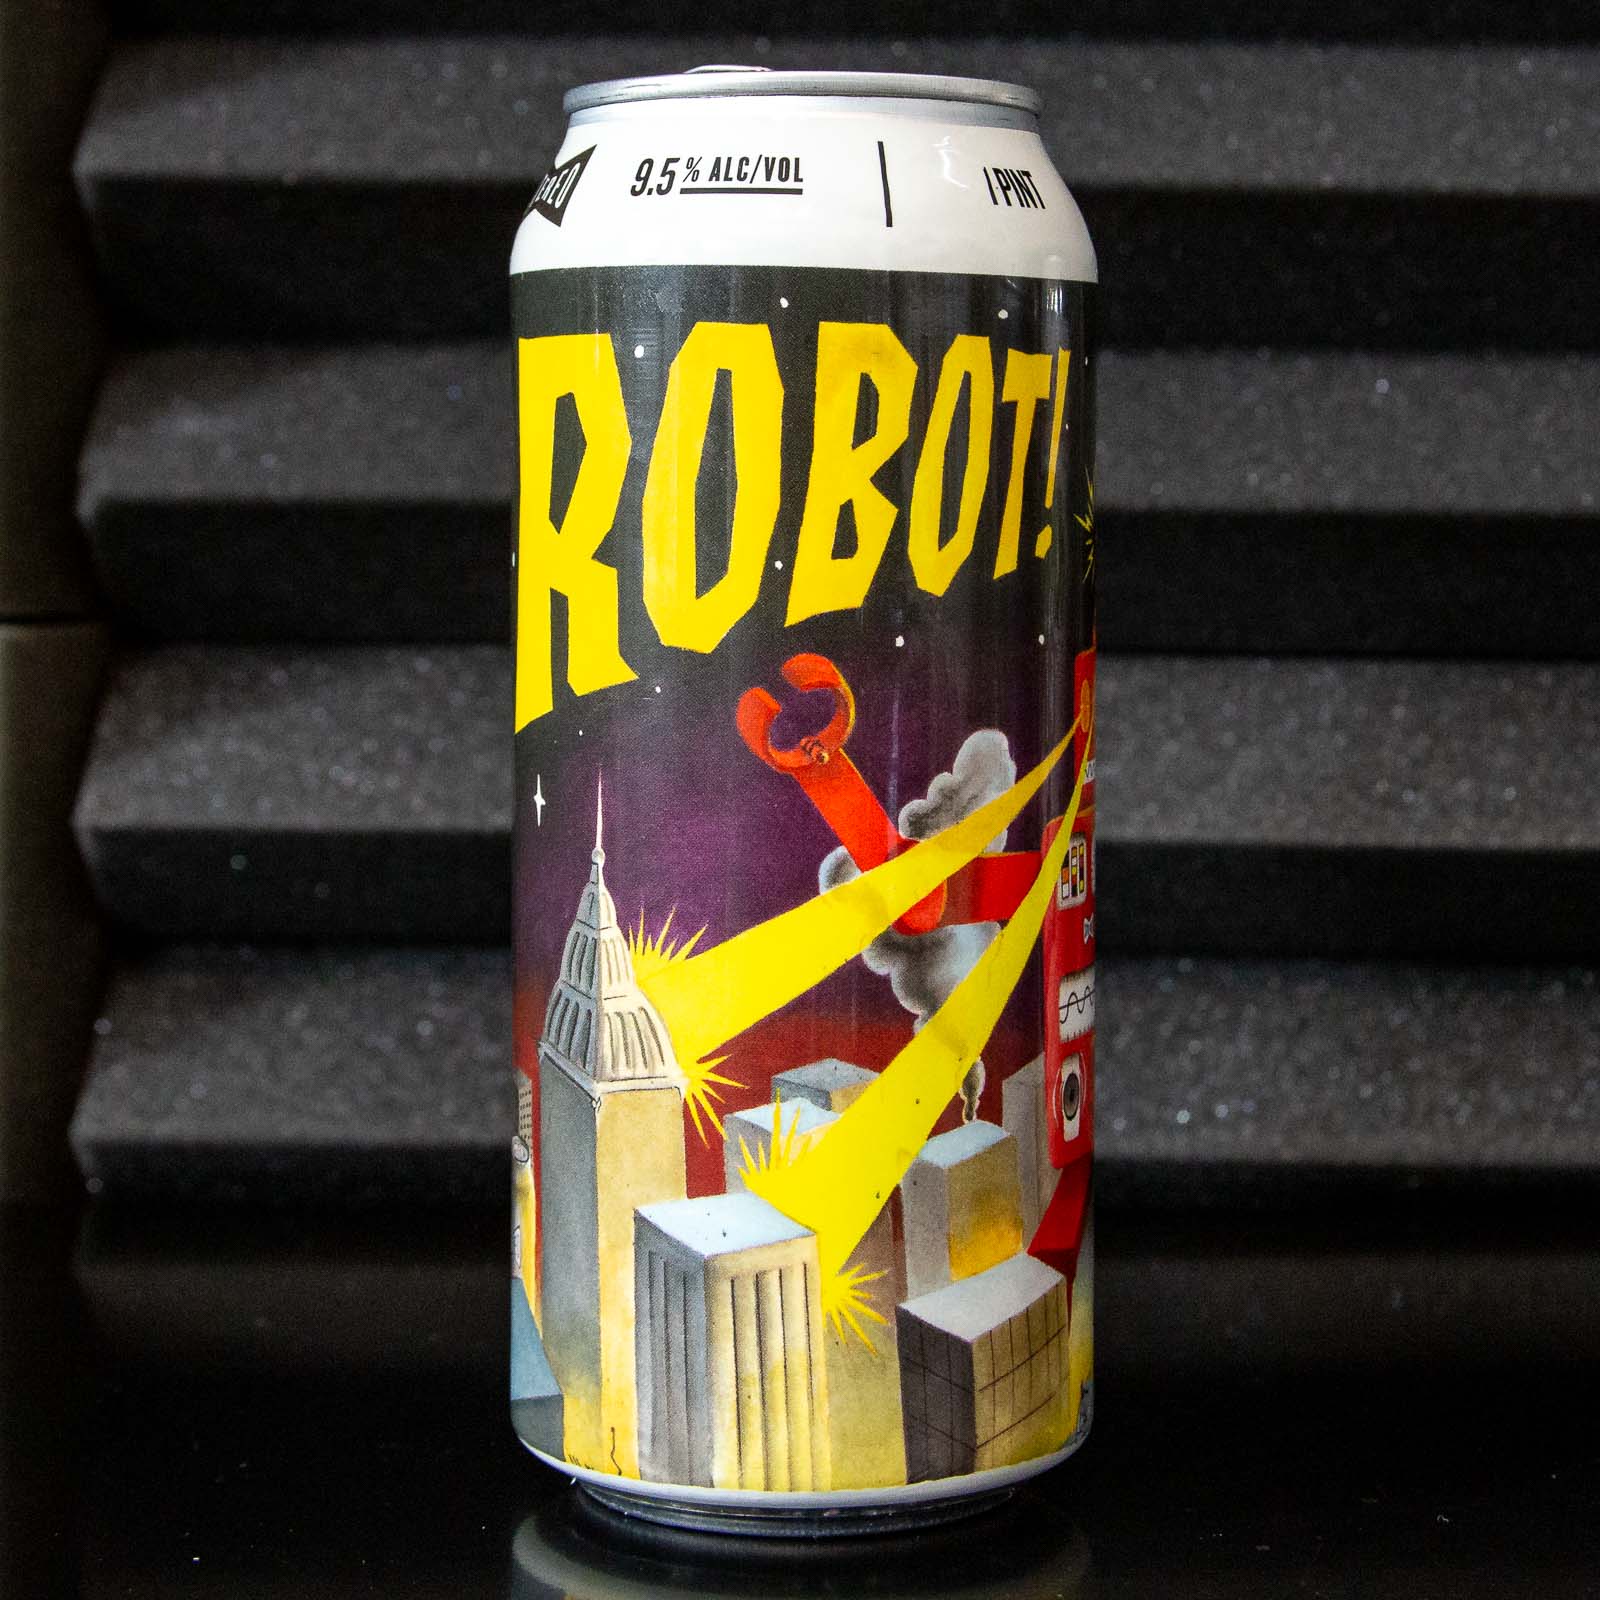 A can of Robot Imperial Red Ale from Stereo Brewing Company.